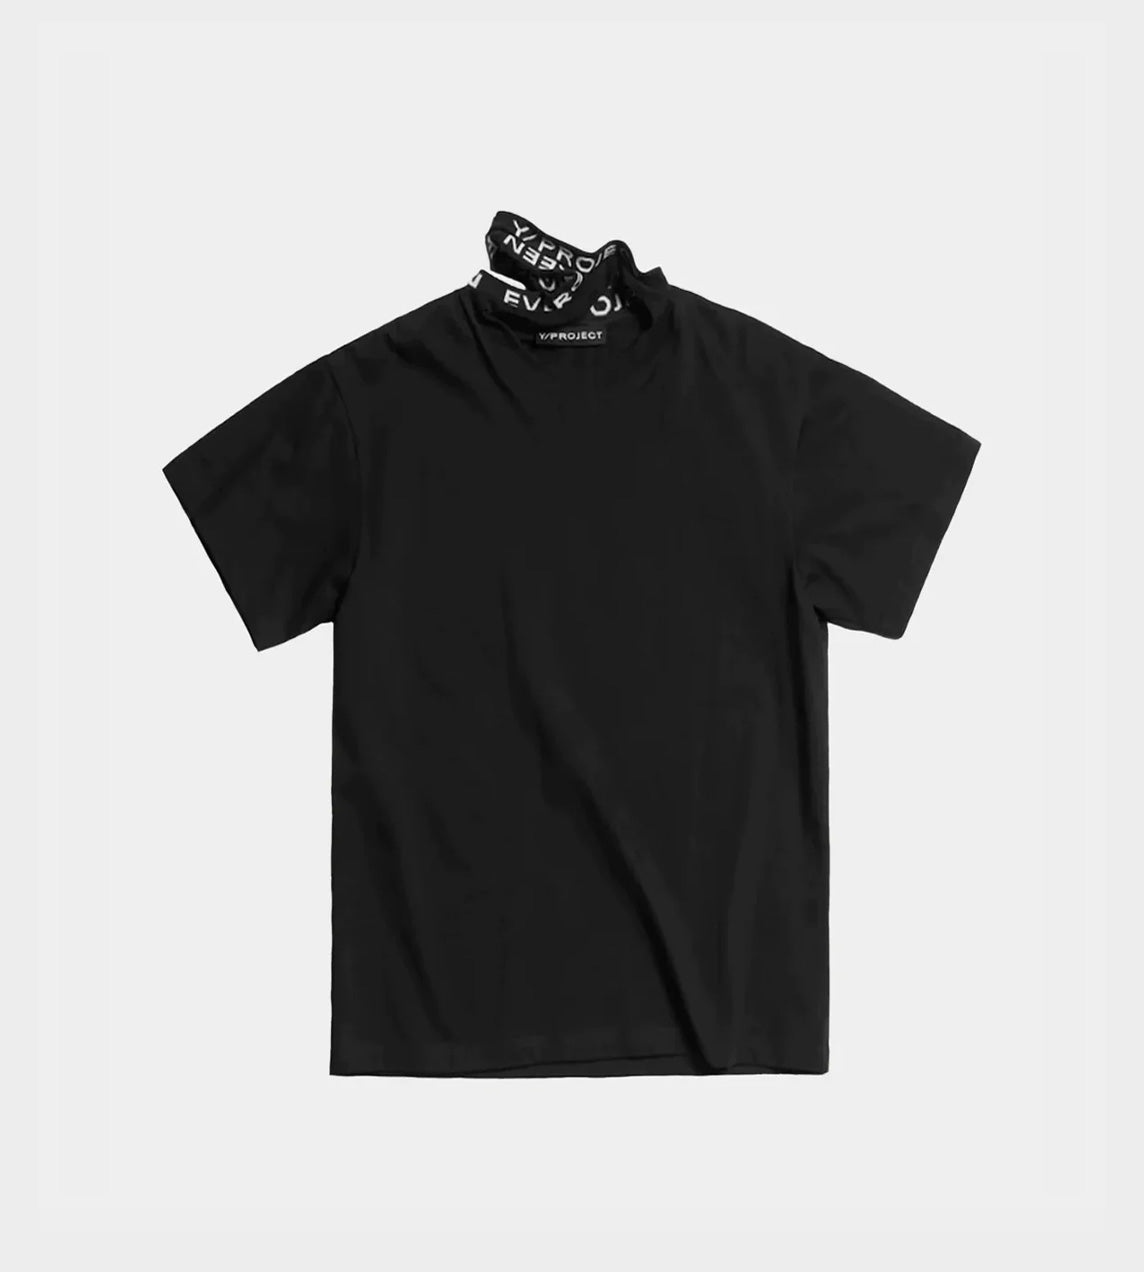 Y/Project - Classic 3 Collar T-Shirt Black